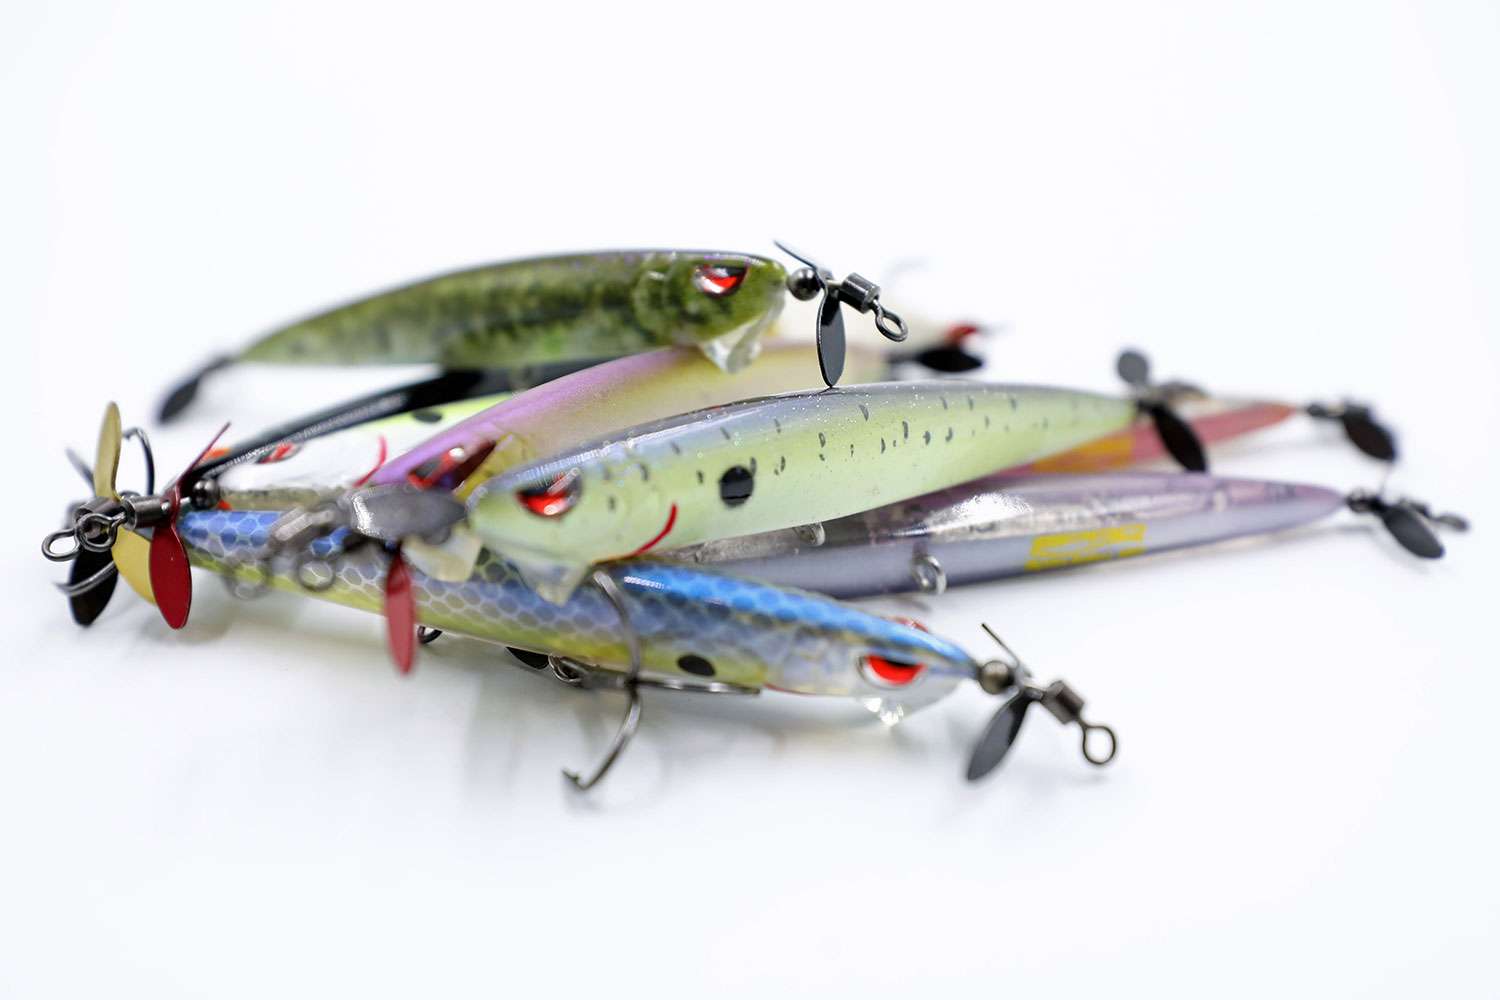 <B> Spro Spin John 80</B><BR>
Designed by Elite Series pro John Crews, the Spin John 80 produces an attractive wobbling action when falling, features swivels that give the bait a better rolling action during the retrieve and the swivels on each end increase hookup ratios. It weighs 5/16 ounces, measures 80 mm and is available in eight colors. 
<BR>
<B>MSRP: $12.99</B>